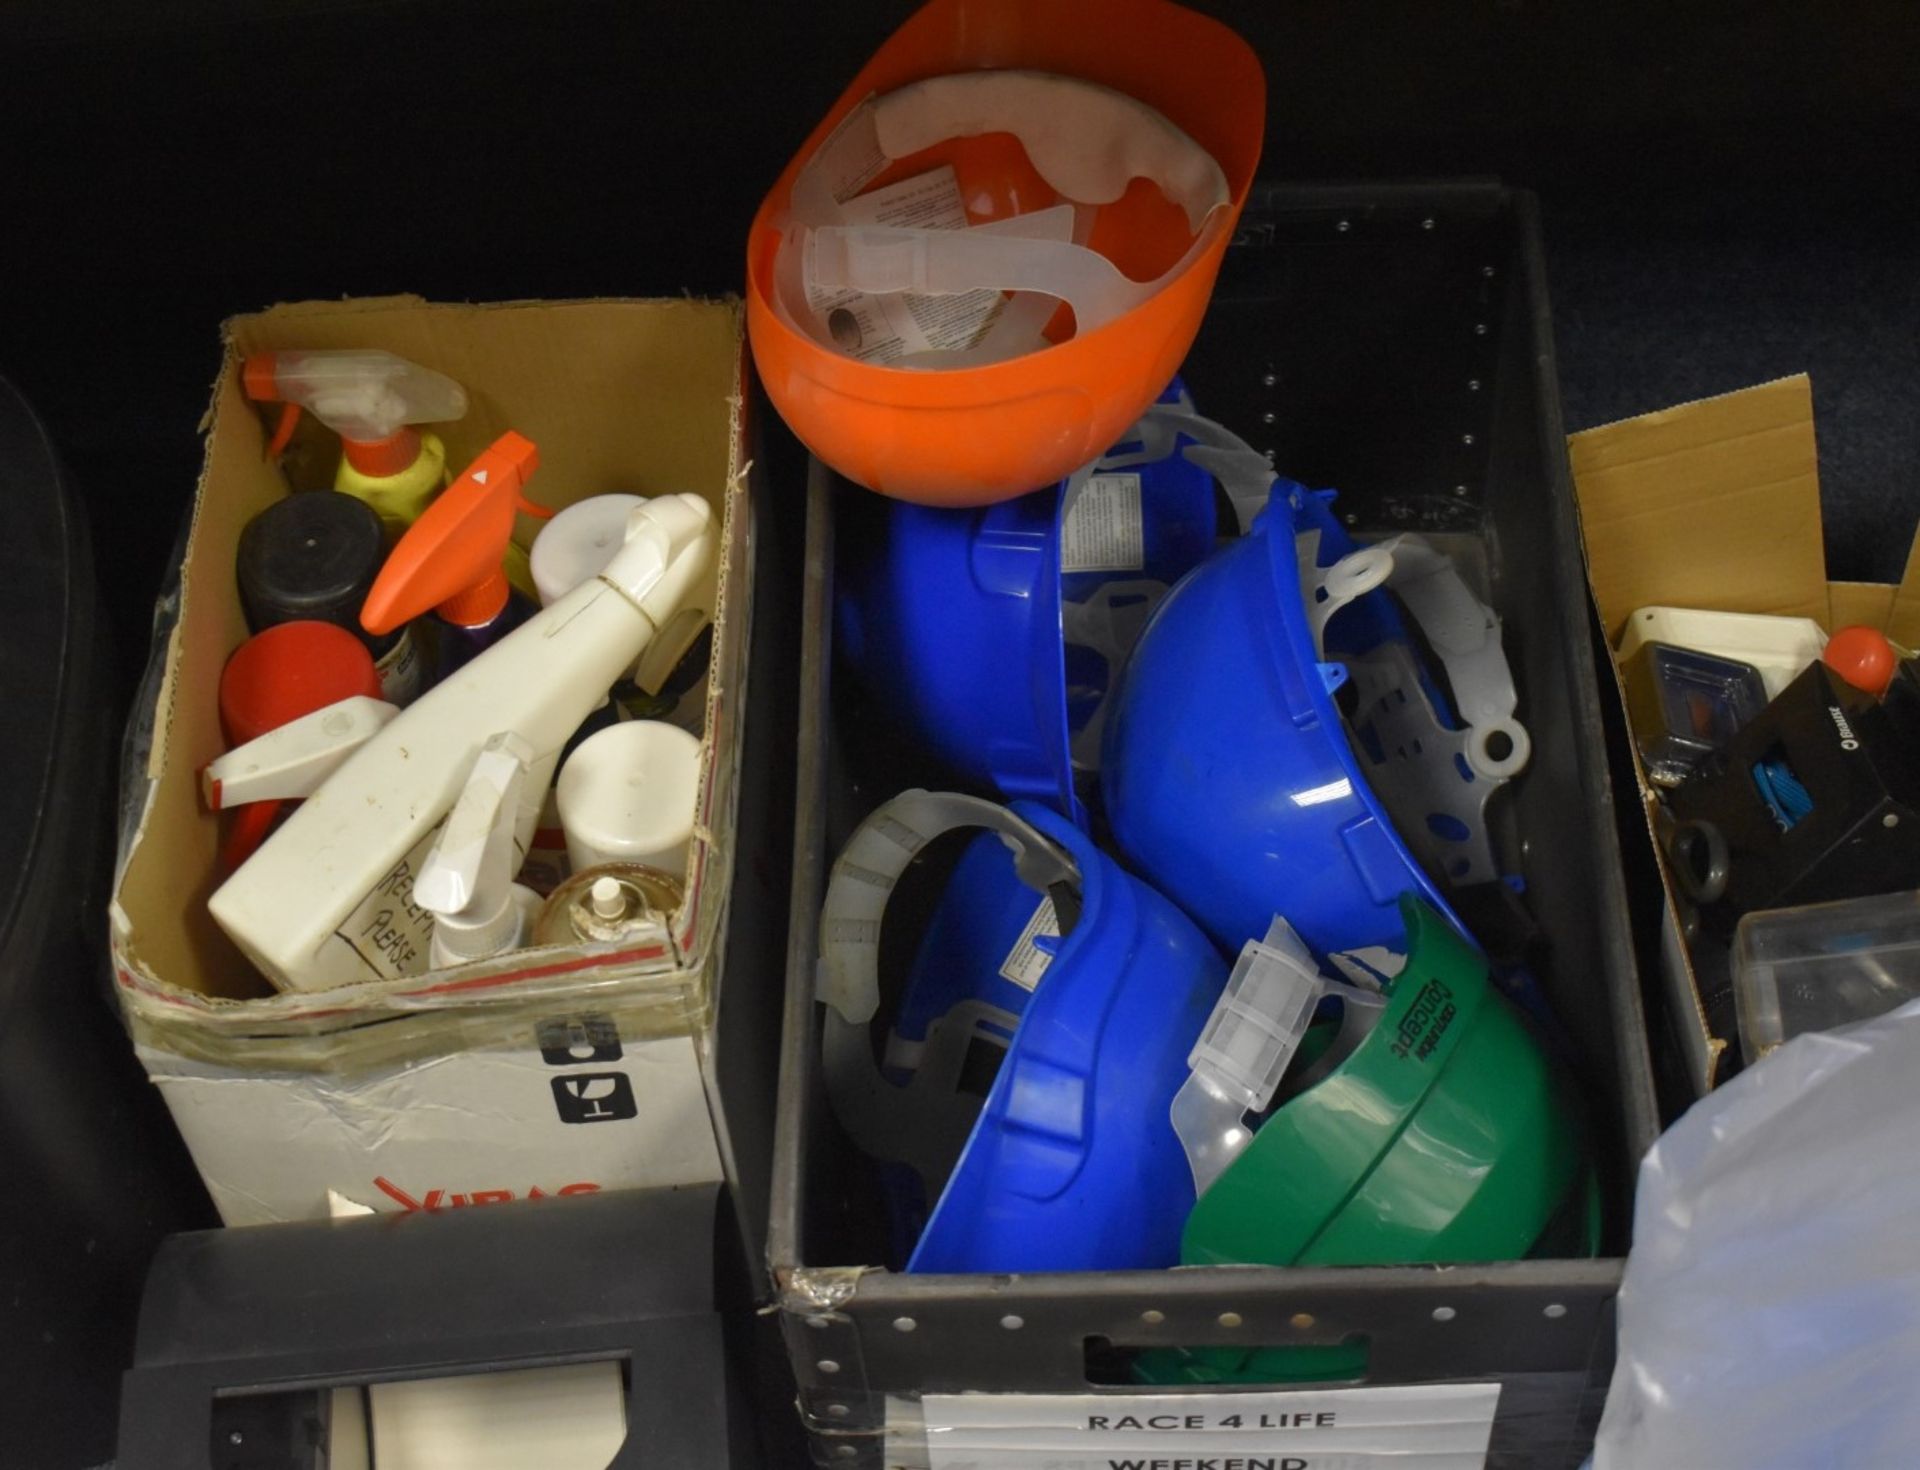 Assorted Job Lot - Includes Hard Hats, Workware, Cameras, Security Wand, Xmas Decorations, Office - Image 6 of 25